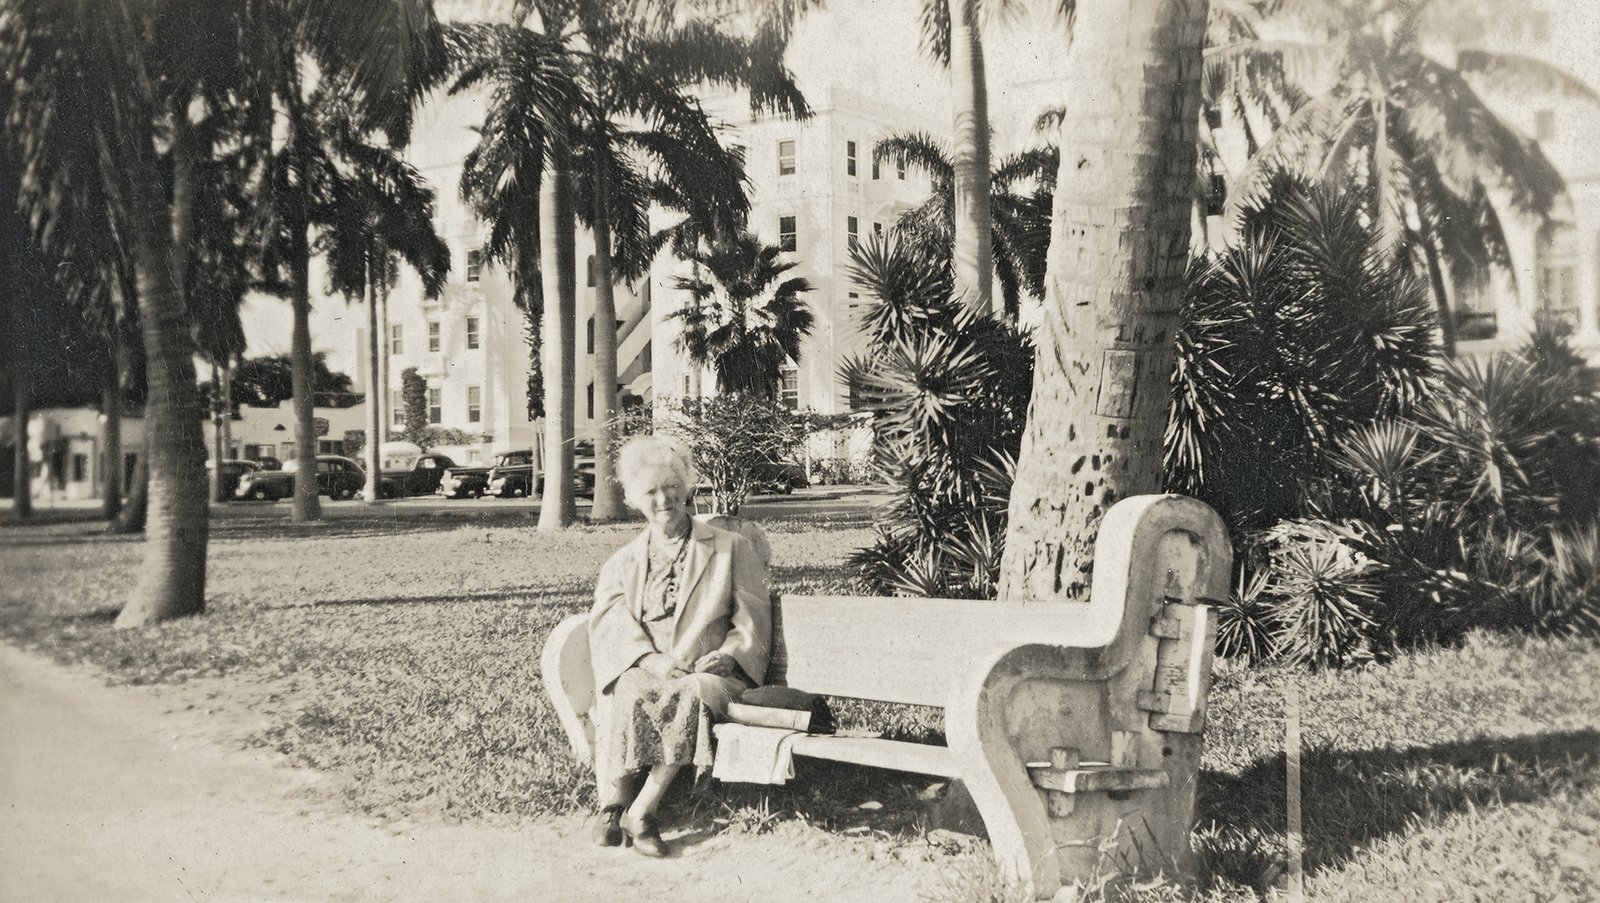 Margaret (O'Toole) McDermott, on holiday in Palm Beach, Florida, 1945.